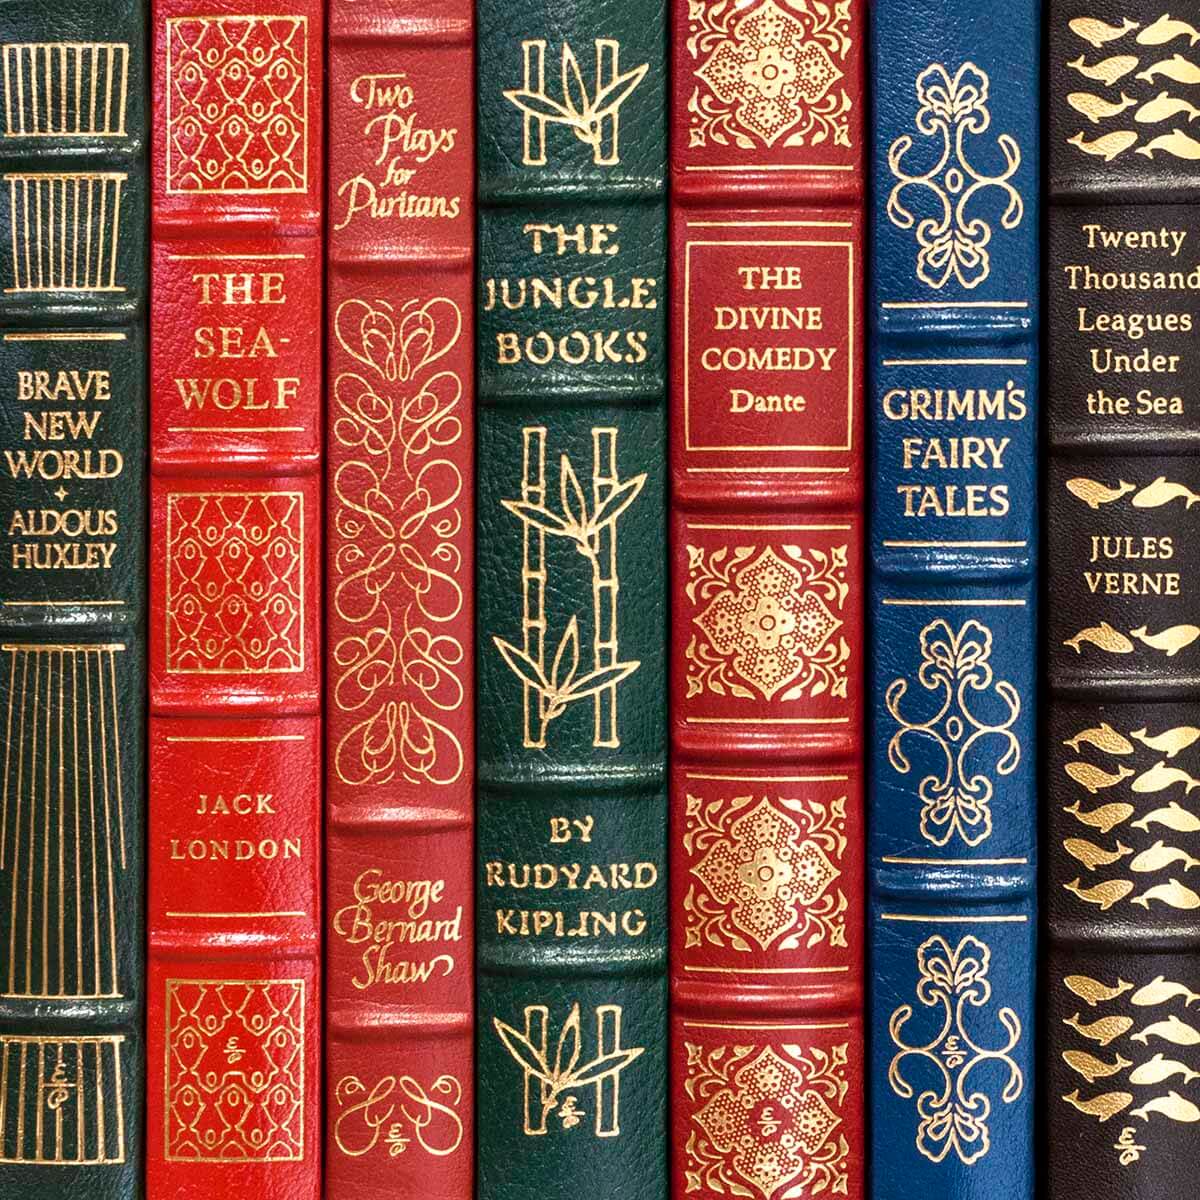 Upgrade your literary collection with Easton Press and The Franklin Library's luxurious leather-bound editions. These classics feature elaborate gilt-decorated bindings, gilded page edges, silk moire endpapers, and a silk page ribbon, making them a stunning addition to any collection.